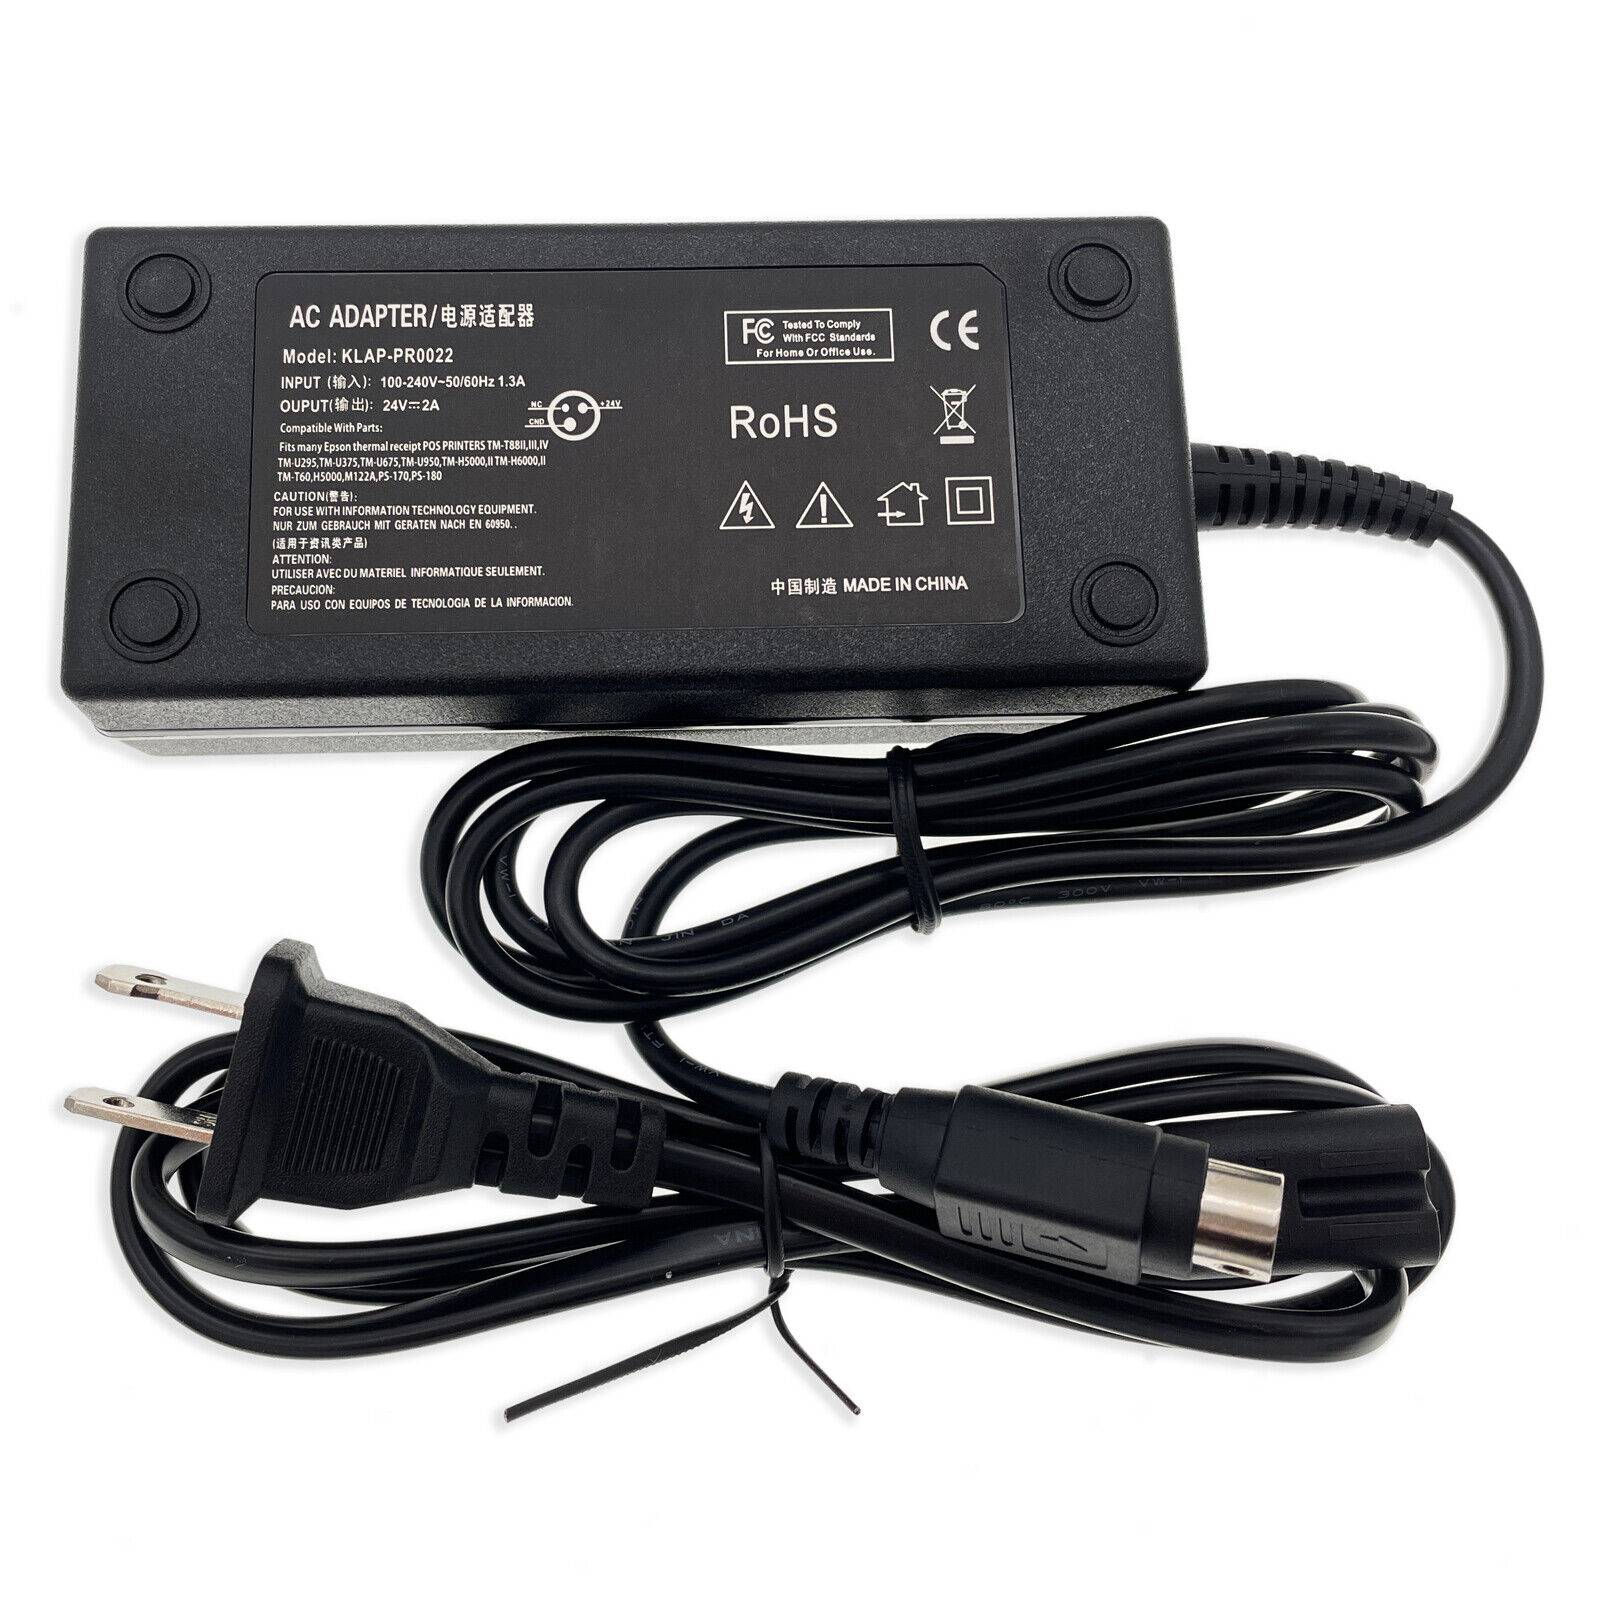 AC Adapter Charger For Epson PS-180 M159B M159A Printers C8255343 TM-T88V M244A